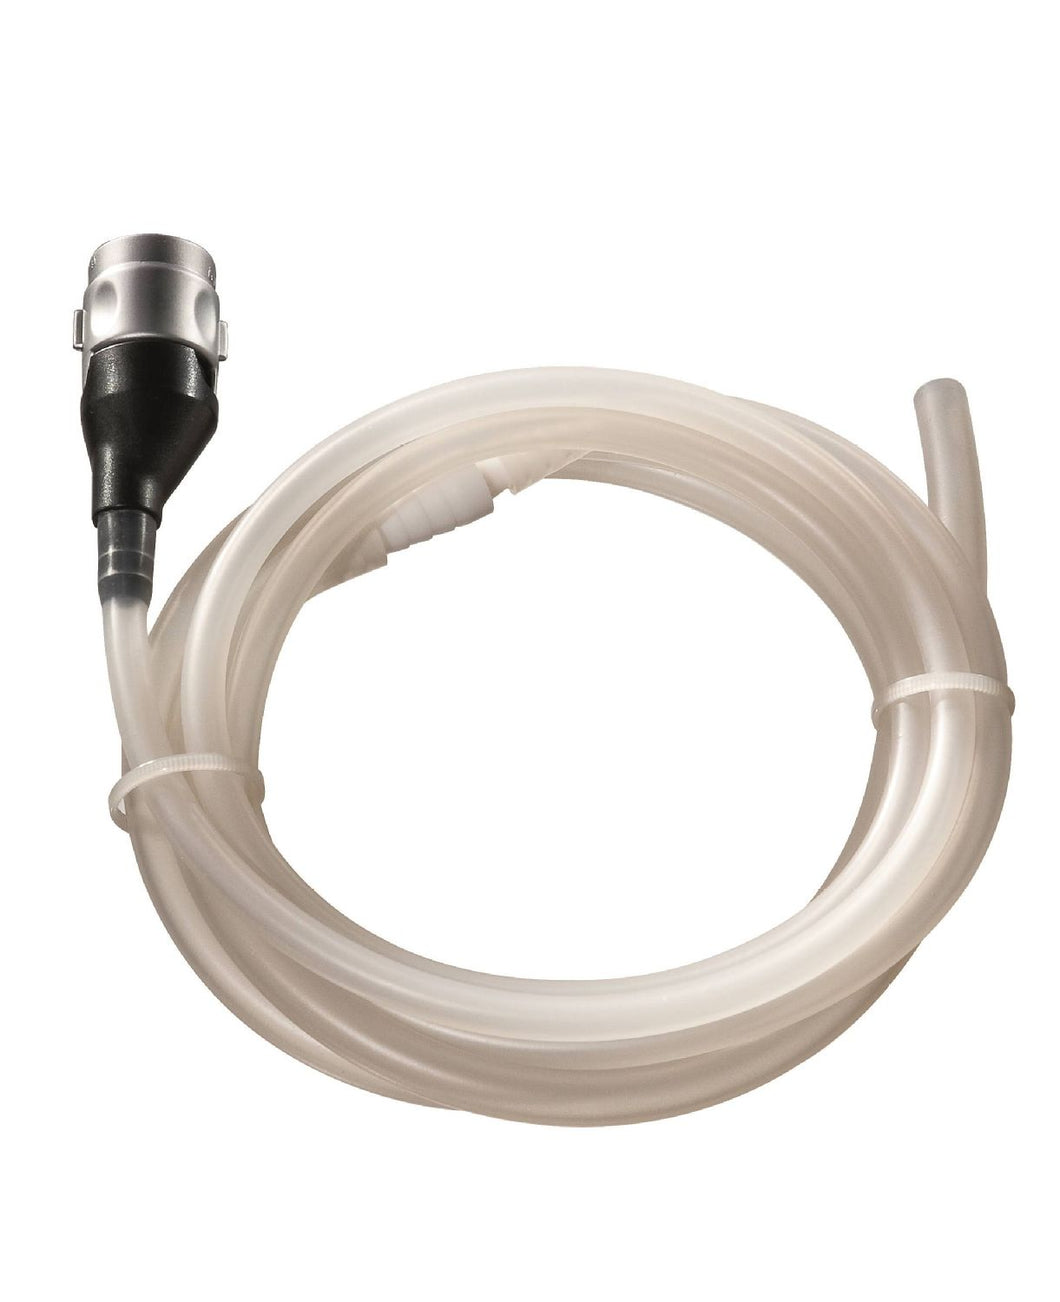 Hose connection set for separate gas pressure 0554 1203 05541203